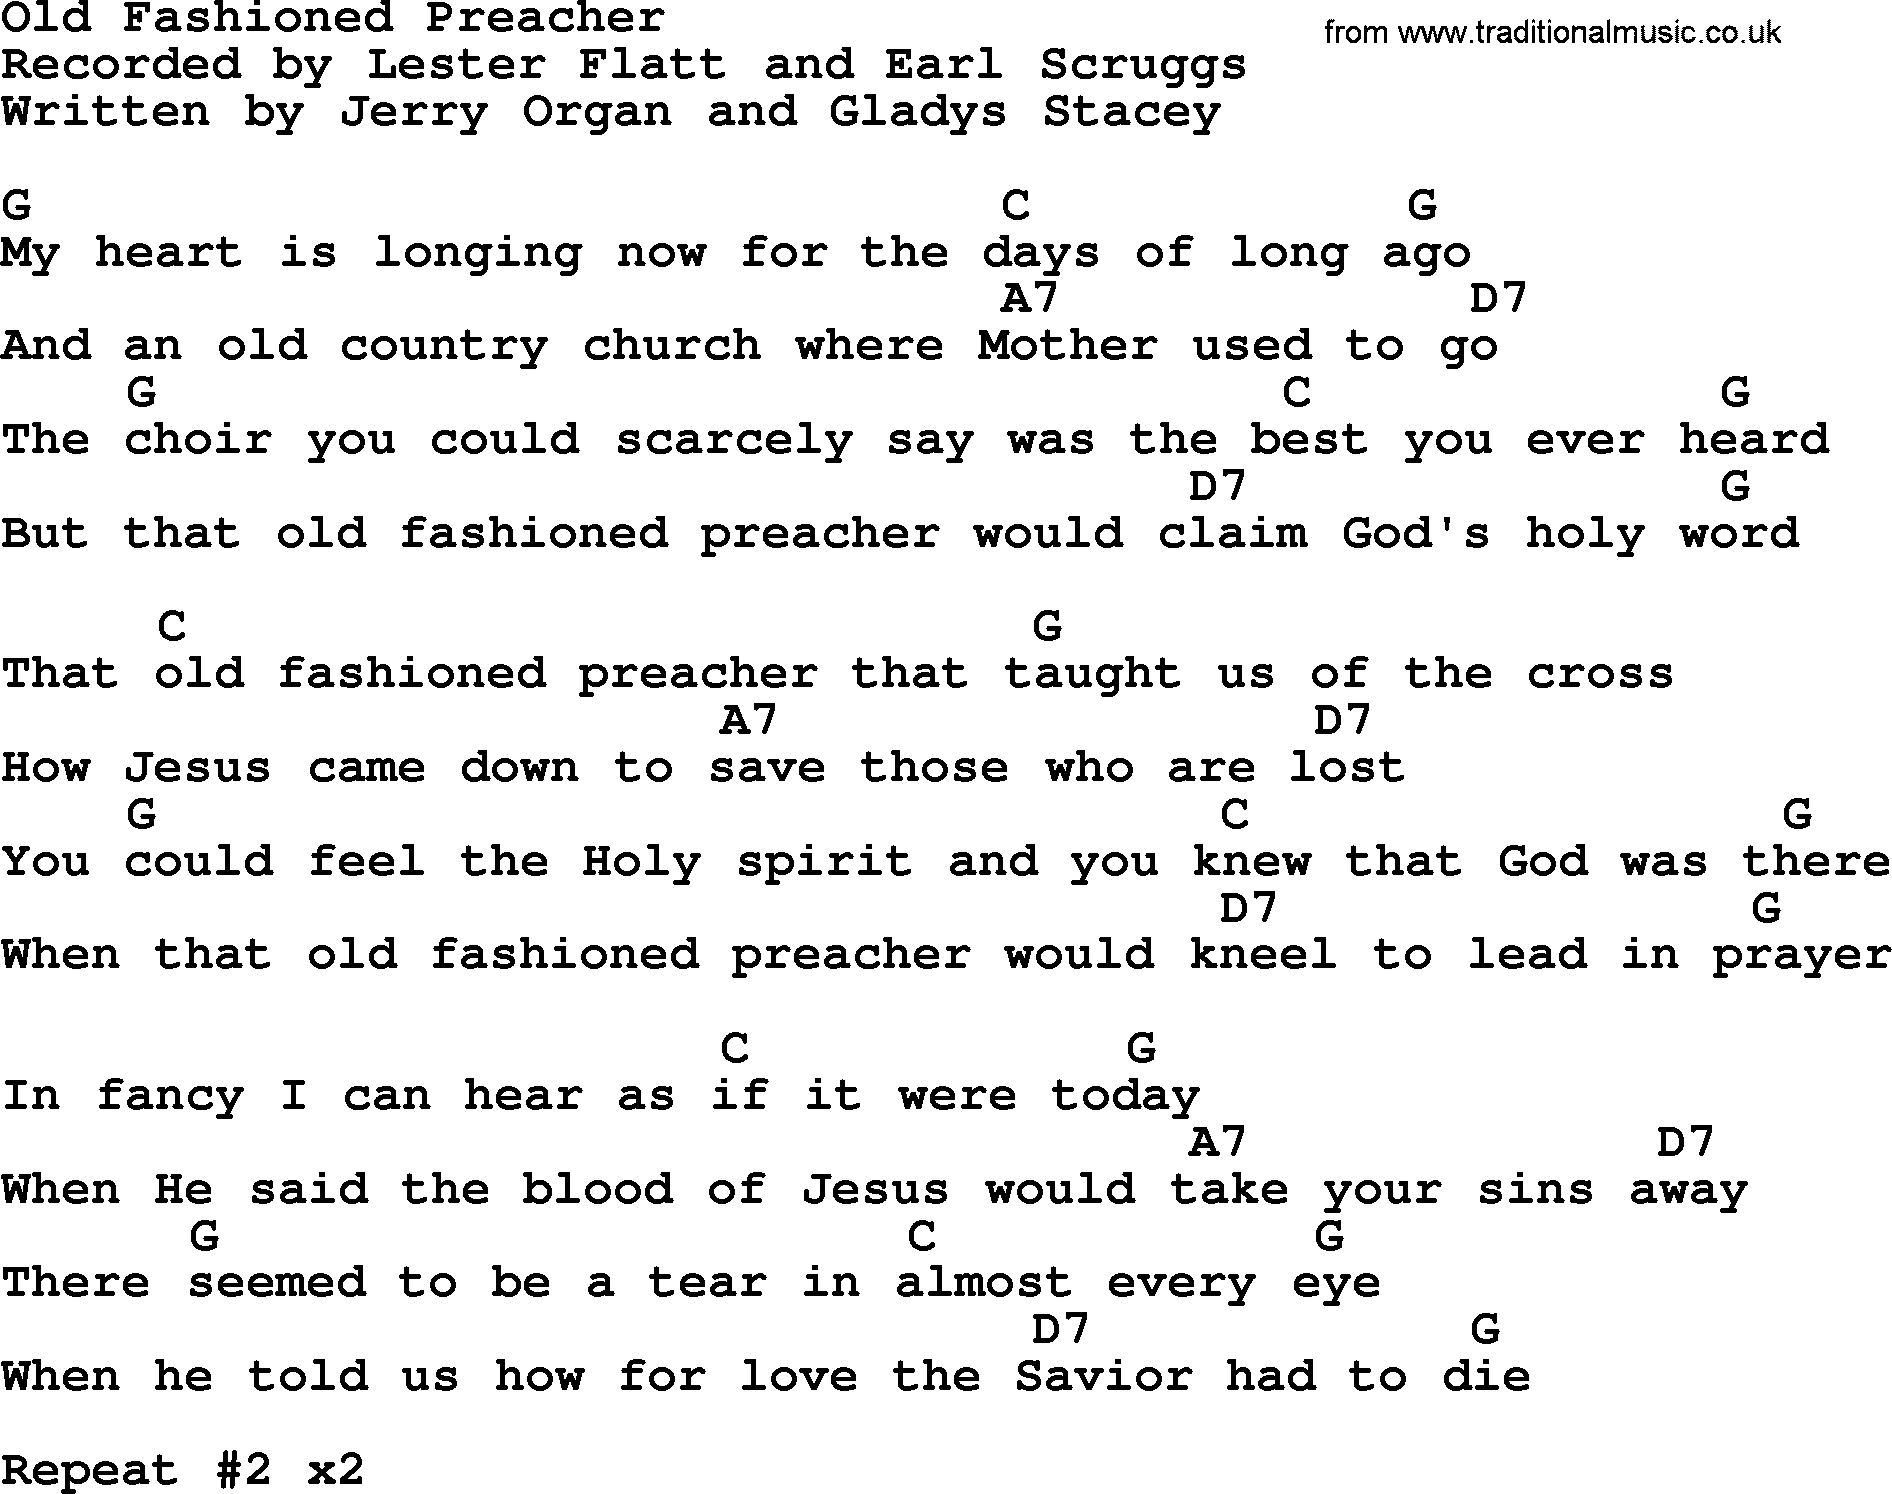 Bluegrass song: Old Fashioned Preacher, lyrics and chords